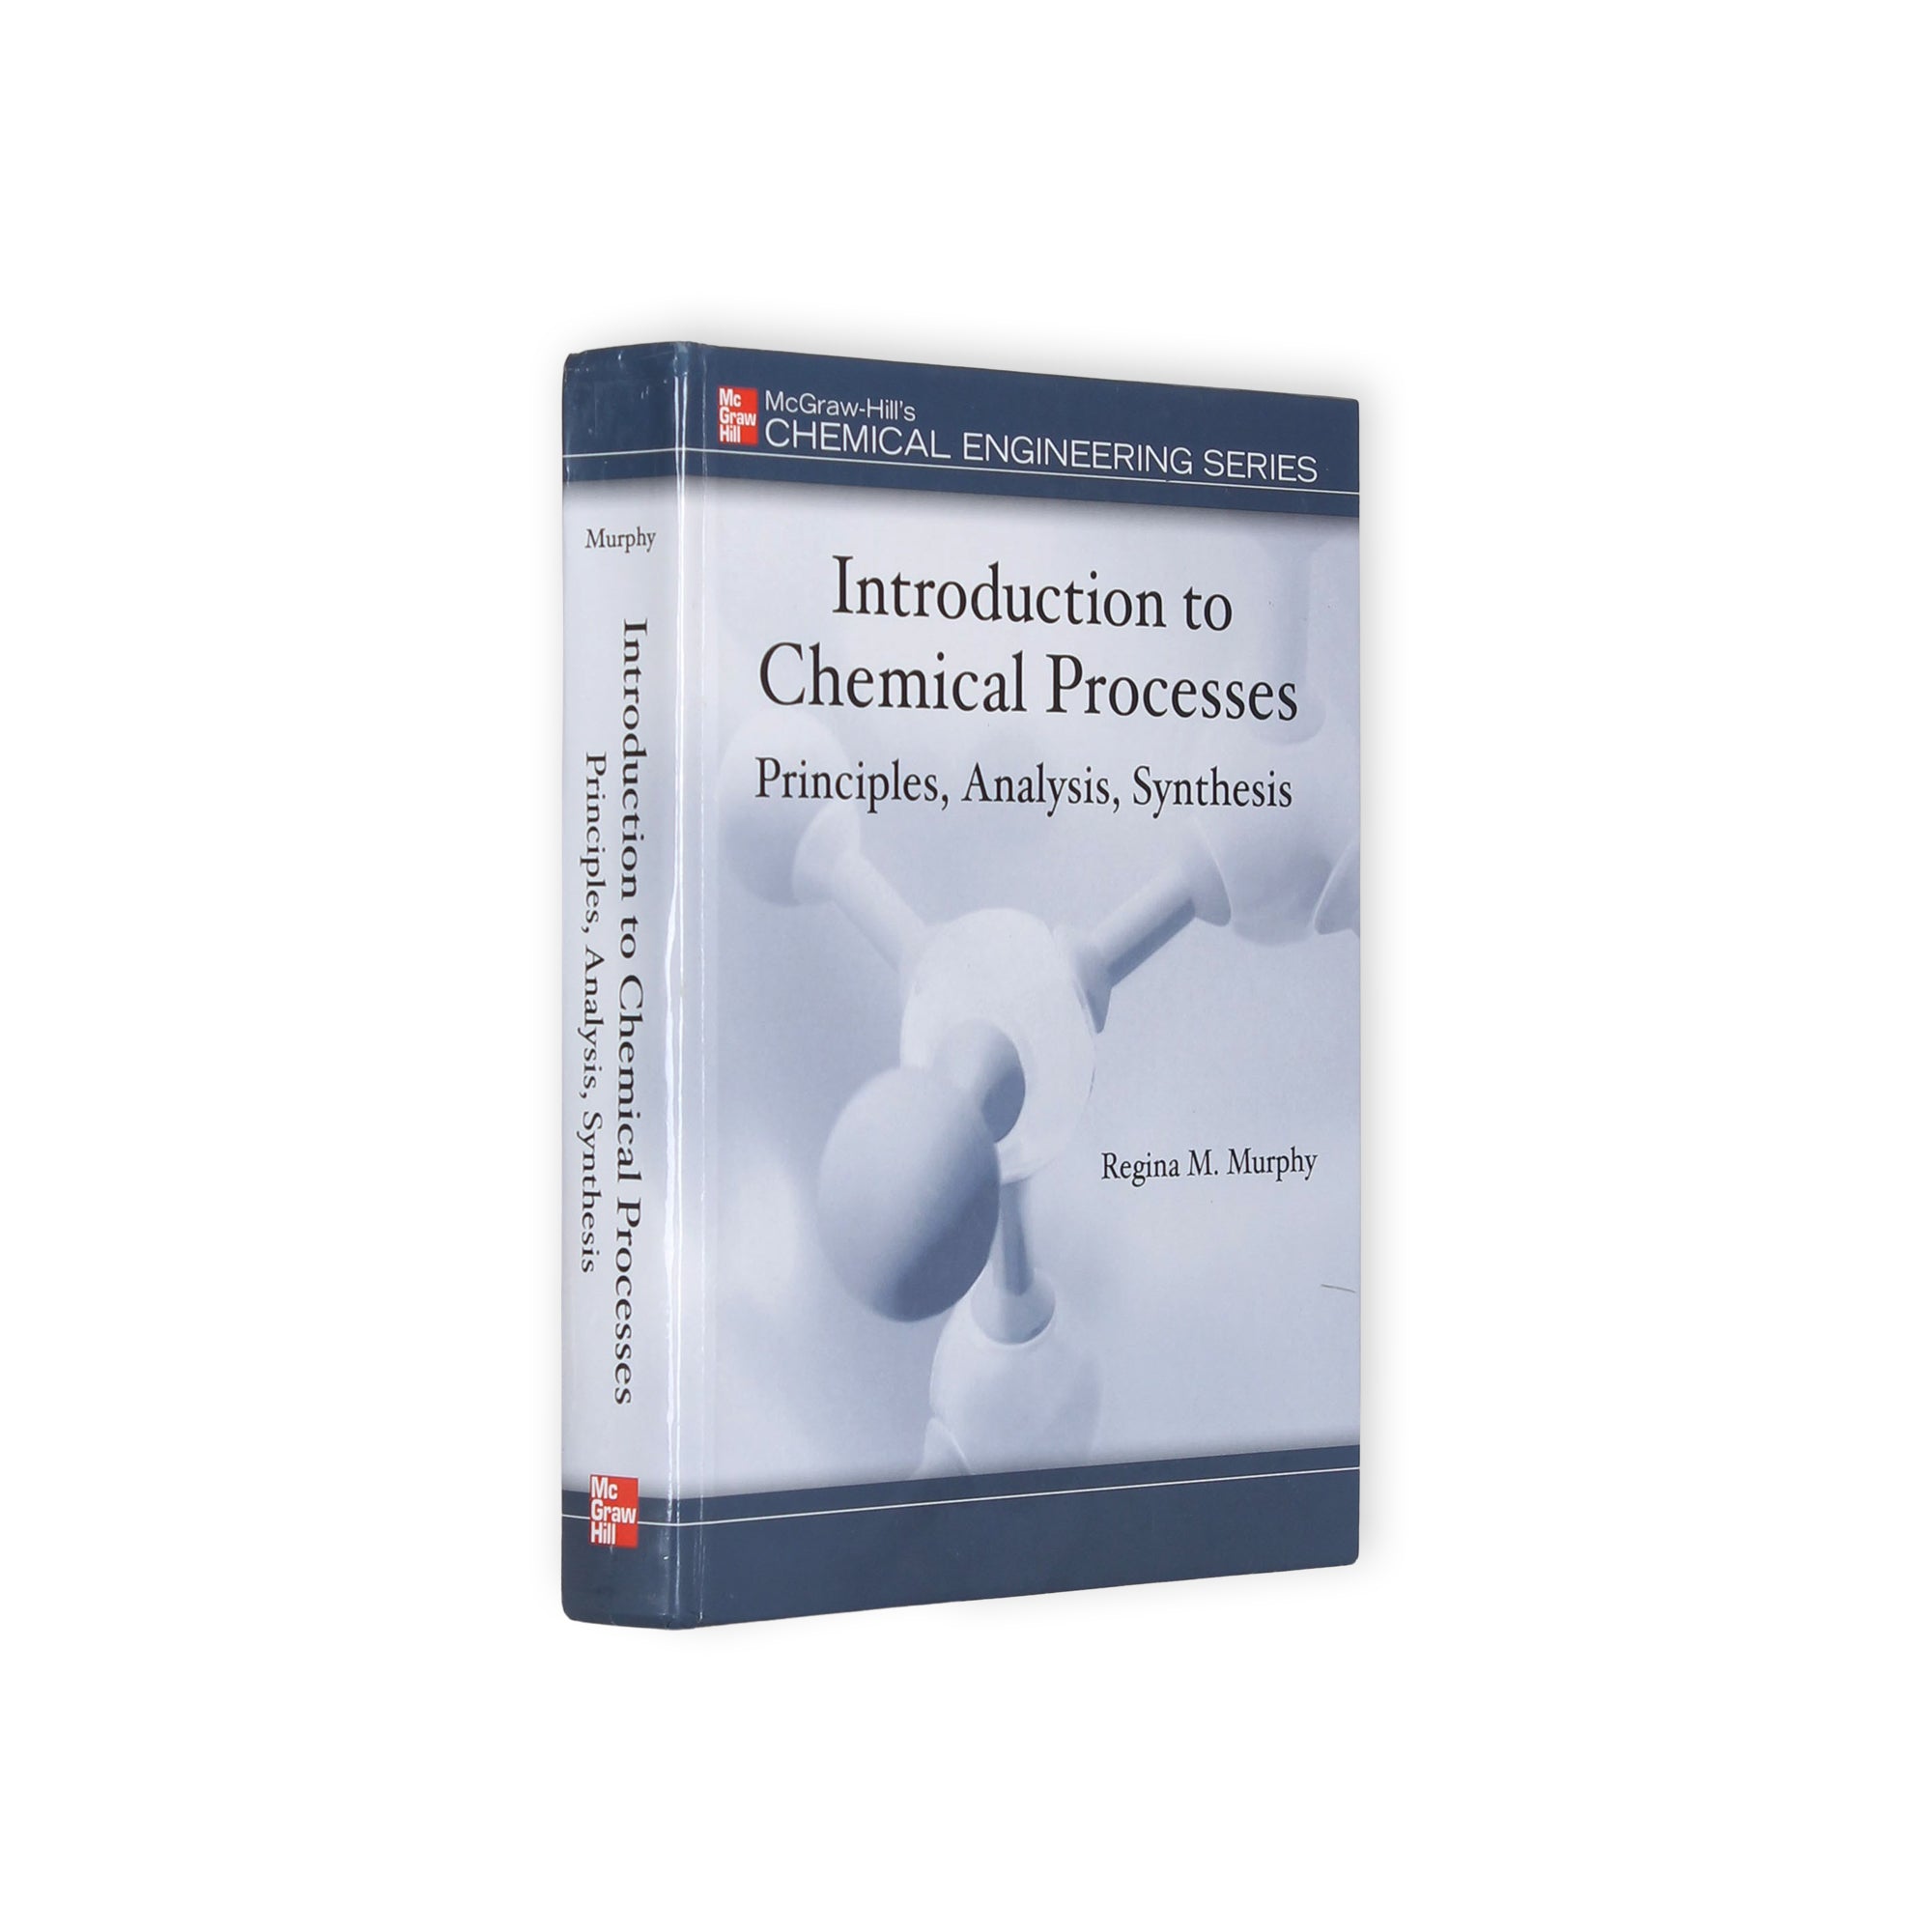 Introduction to Chemical Processes - Book Safe - Secret Storage Books